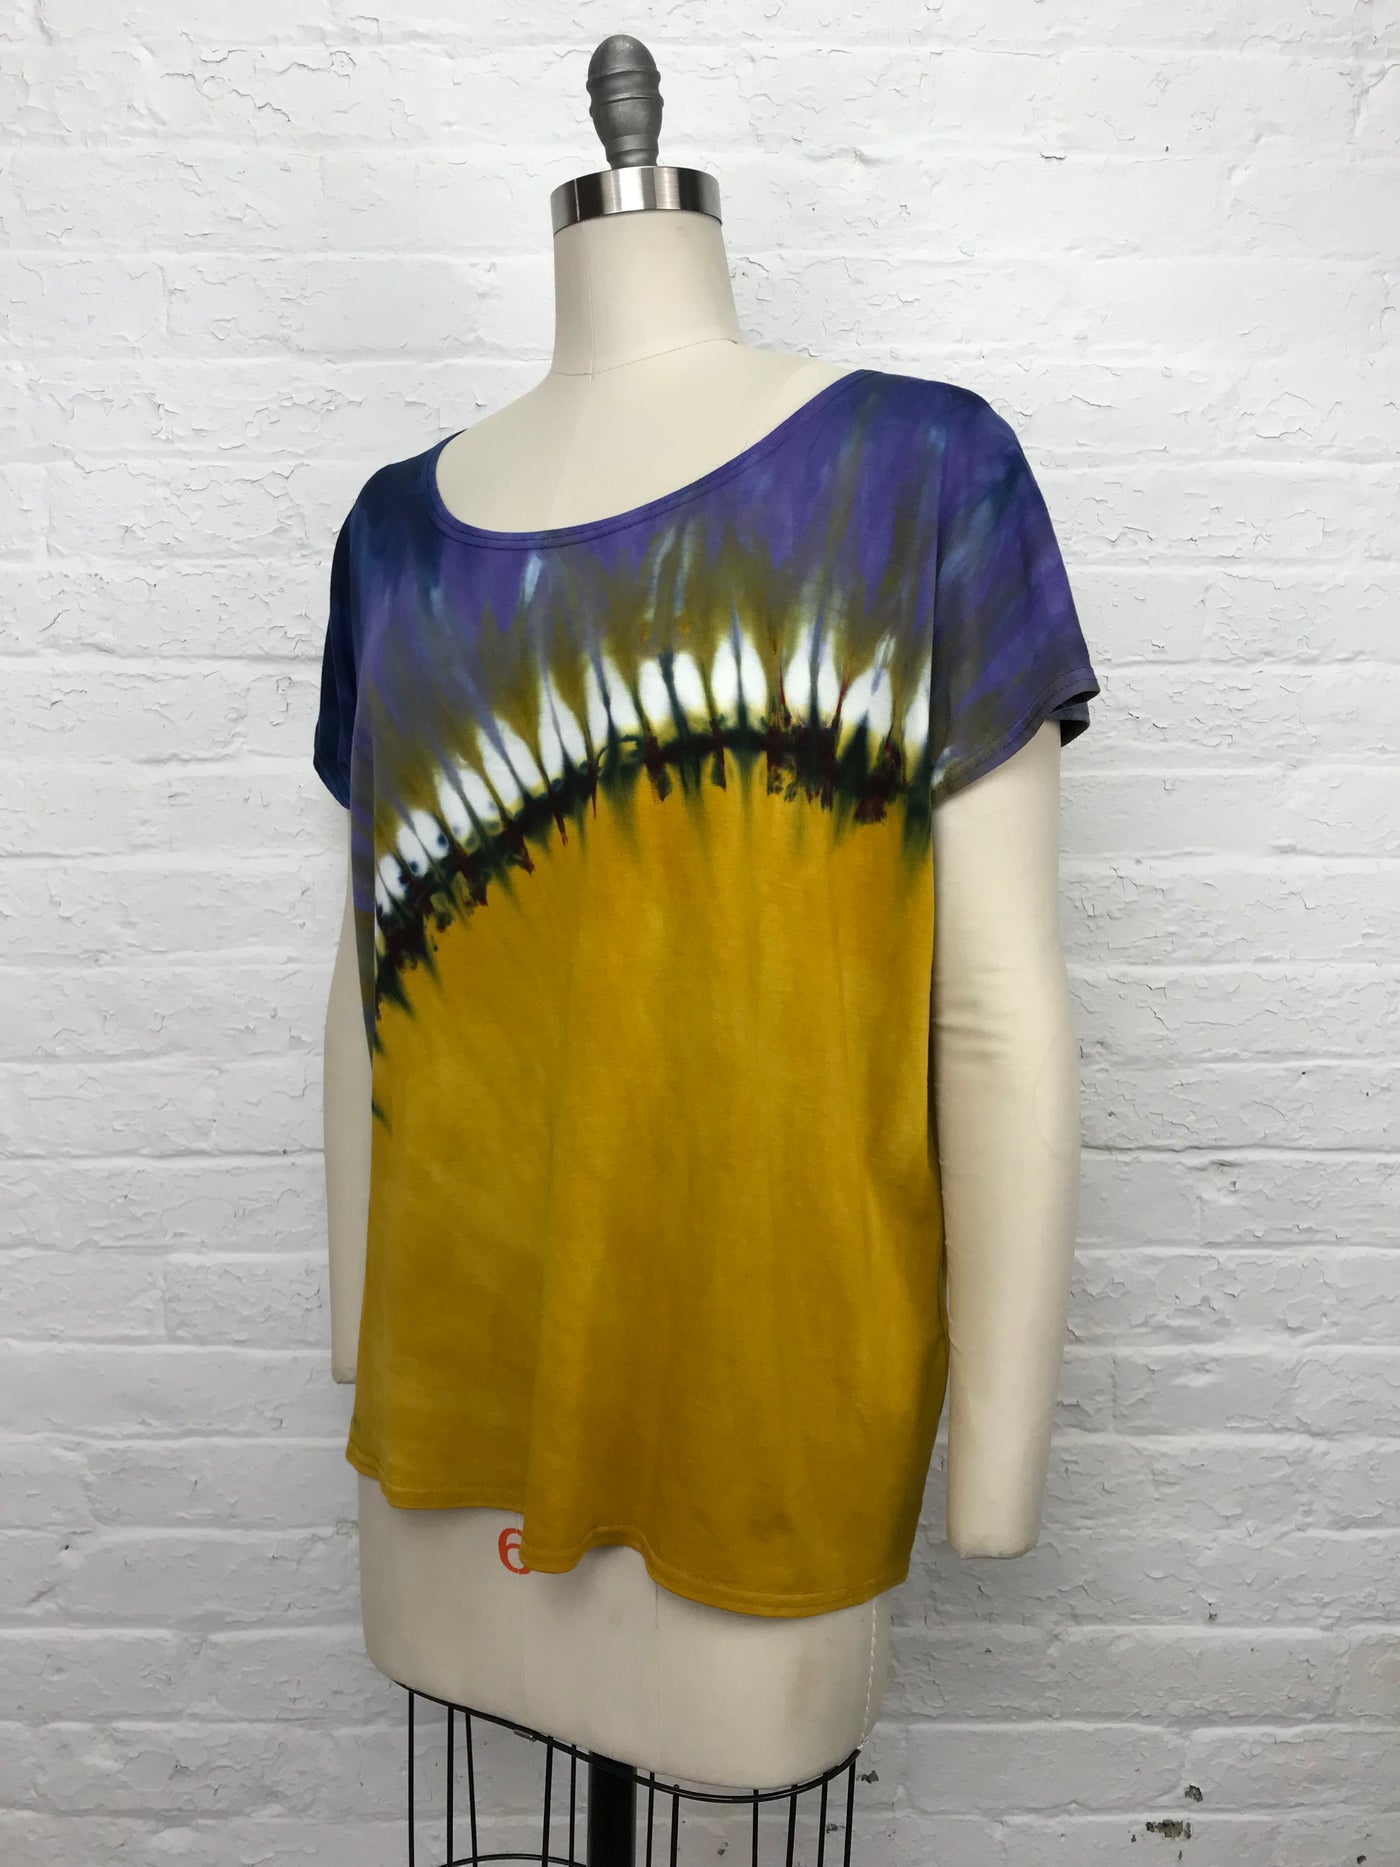 Loose Fitting Oversized Hand Dyed Elsie Top in Kalahari Sunrise - side view